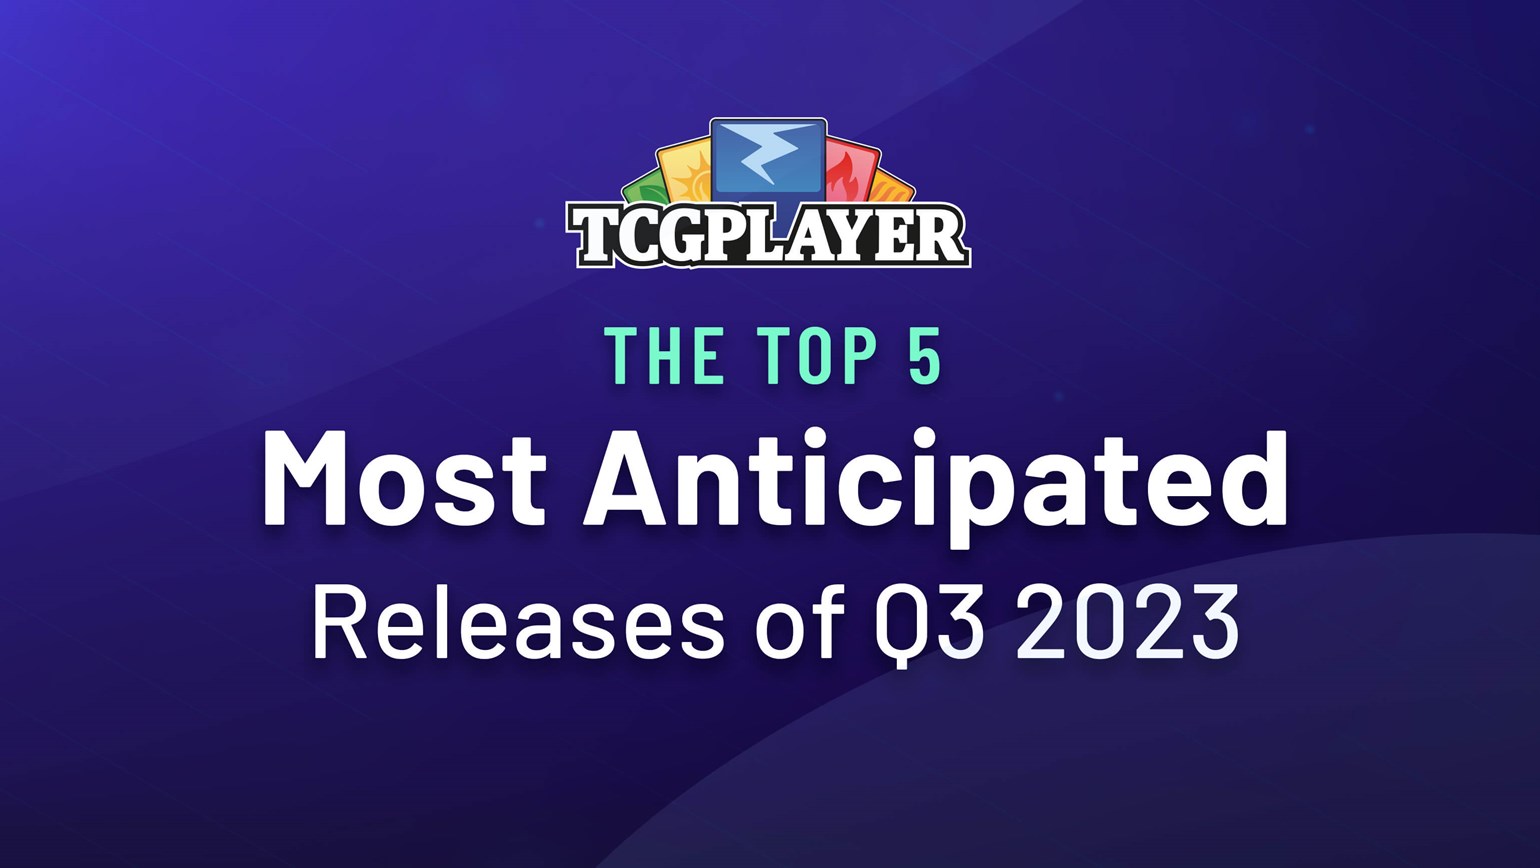 The Top 5 Most Anticipated Releases of Q3 2023